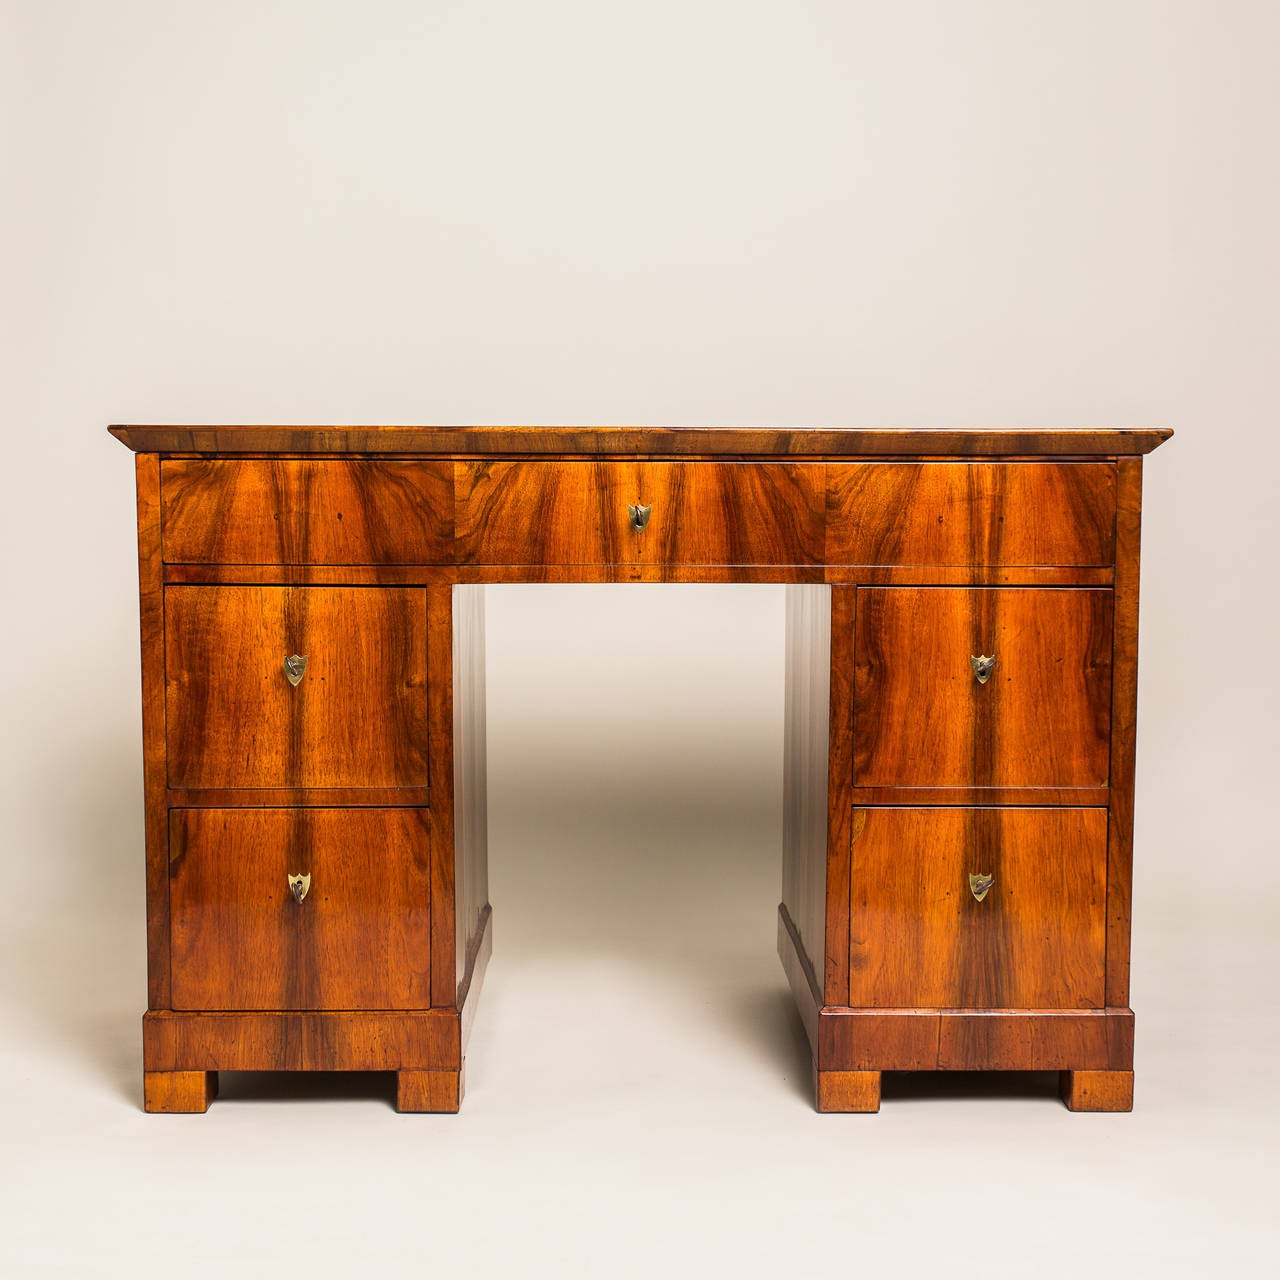 This exceptional Biedermeier writing desk hailing from Austria, circa 1830, has a compact but very handsome look. The rectangular corpus with great arranged walnut wood veneer, features a spacious drawer at the top and two deeper drawers on opposite